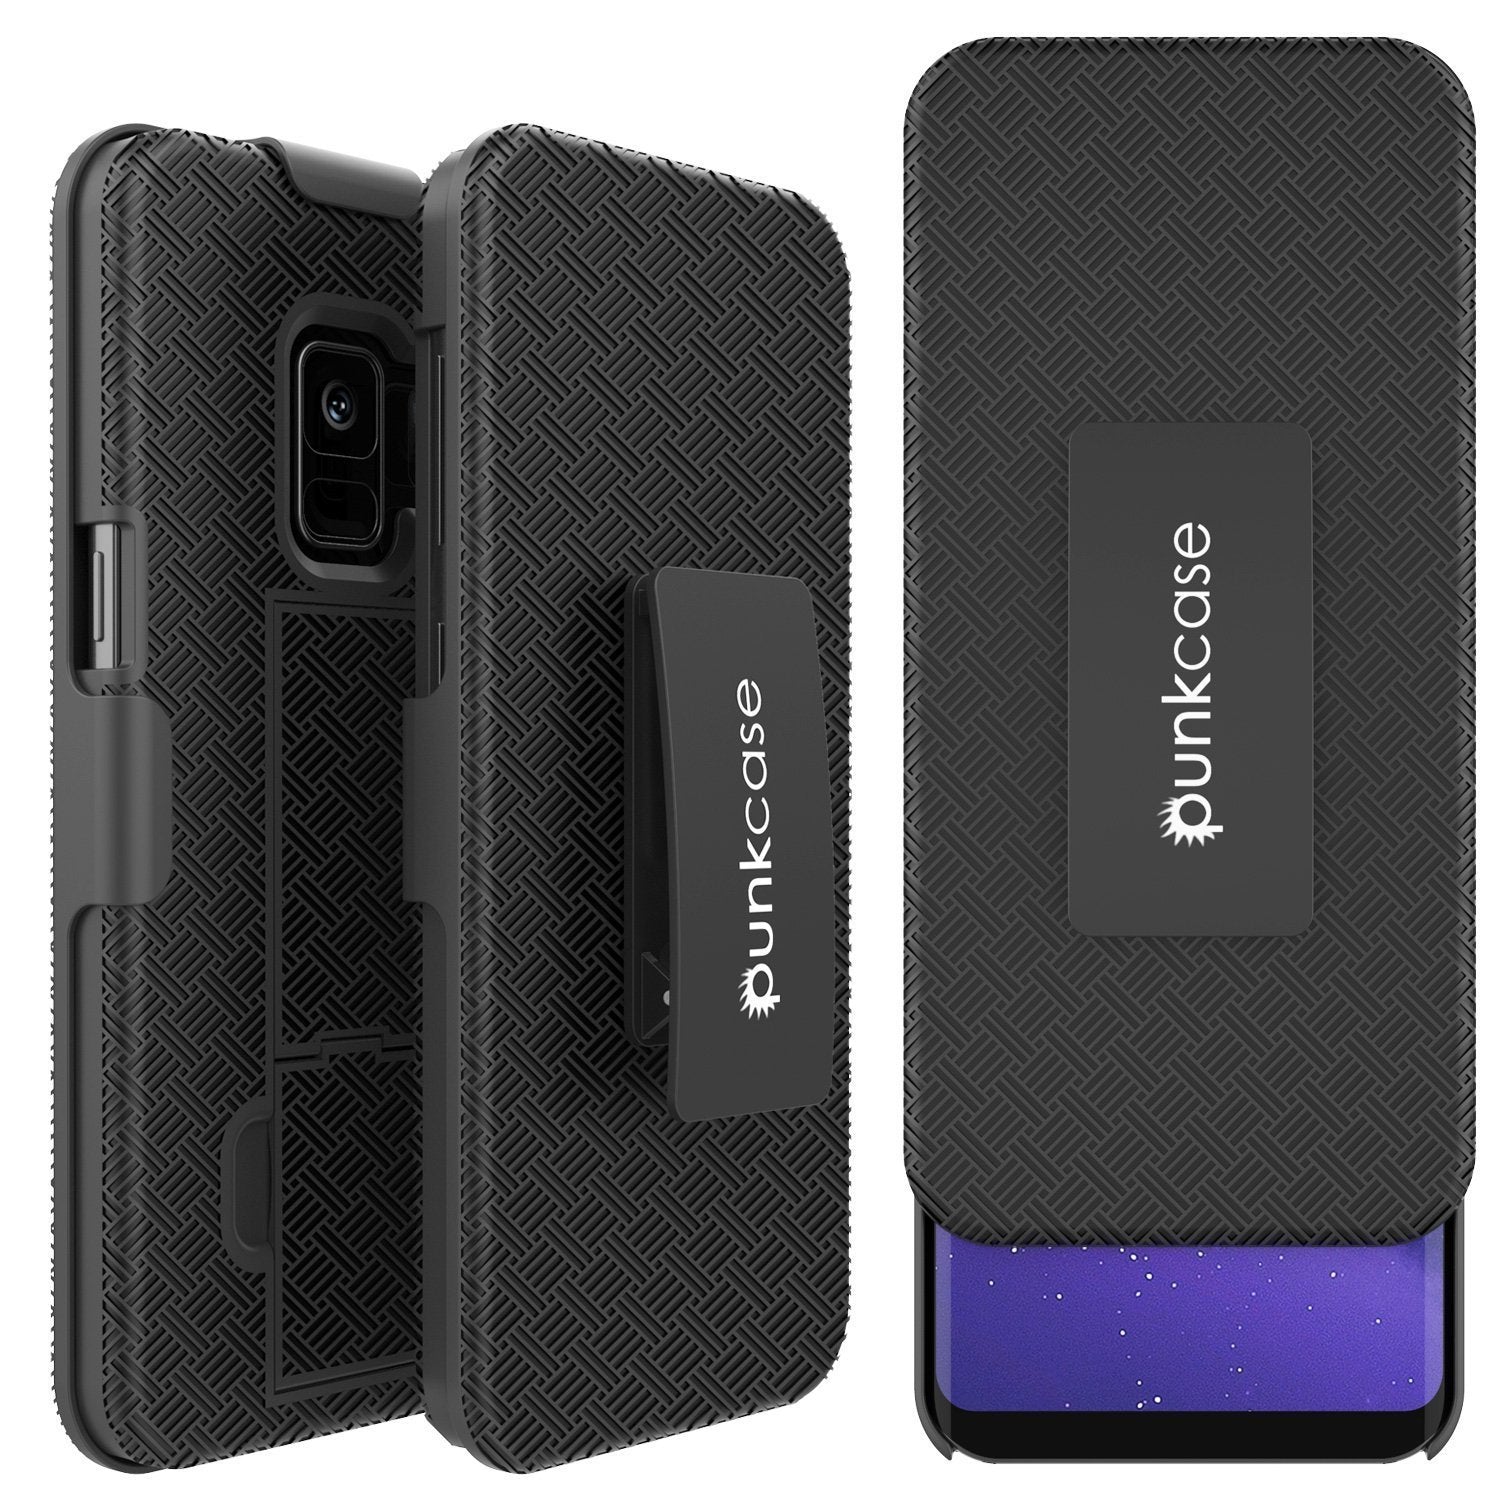 Punkcase Galaxy s10 Case With Screen Protector, Holster Belt Clip [Black]